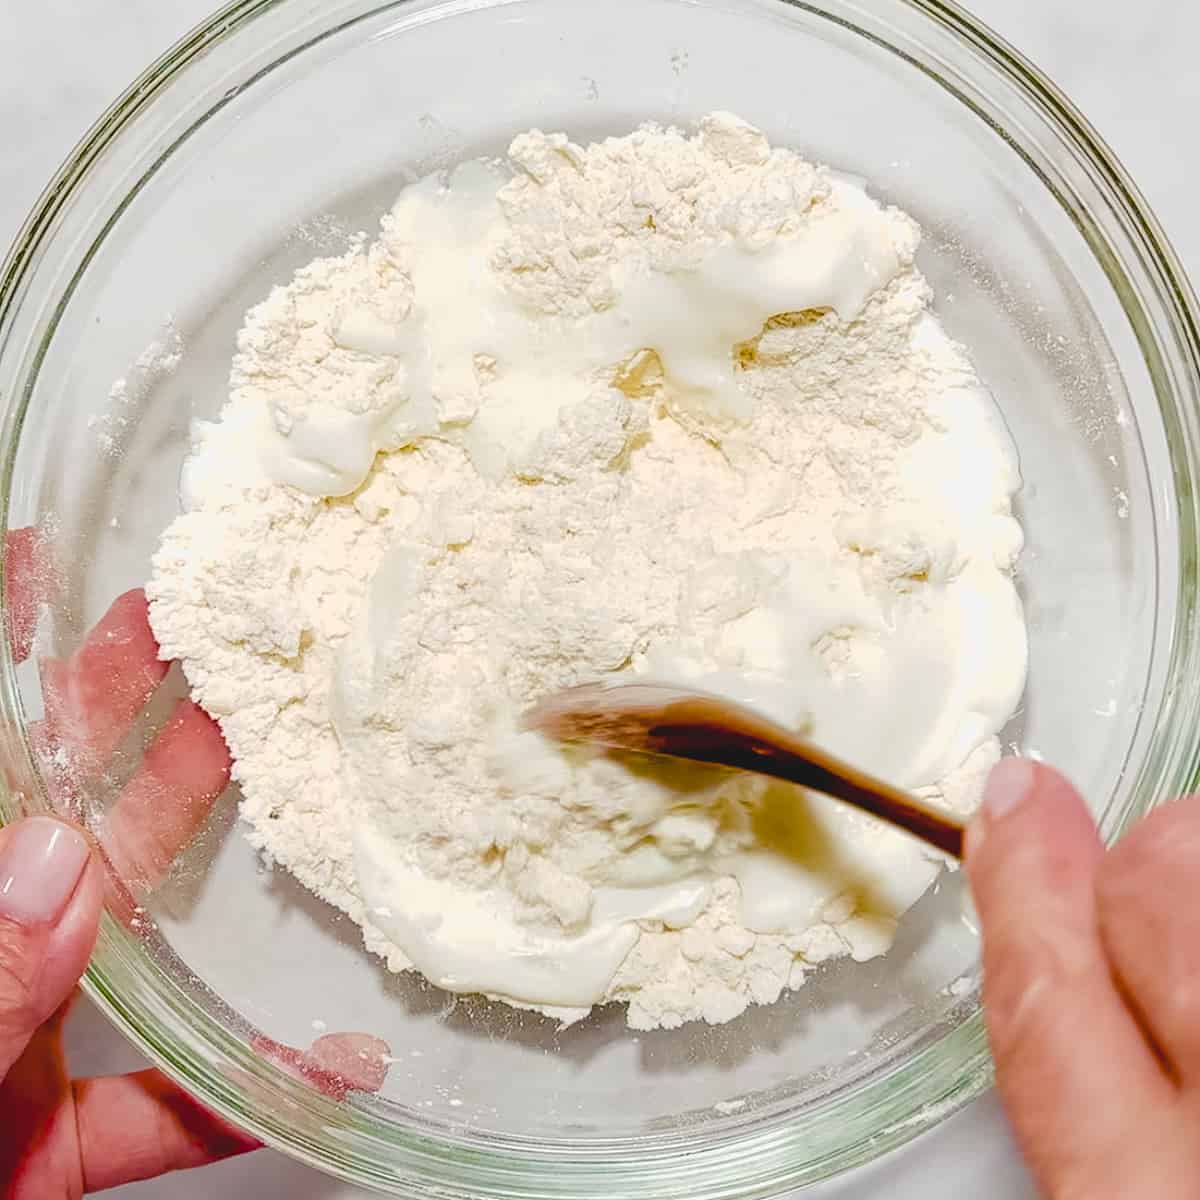 mixing buttermilk into dry ingredients for biscuits.